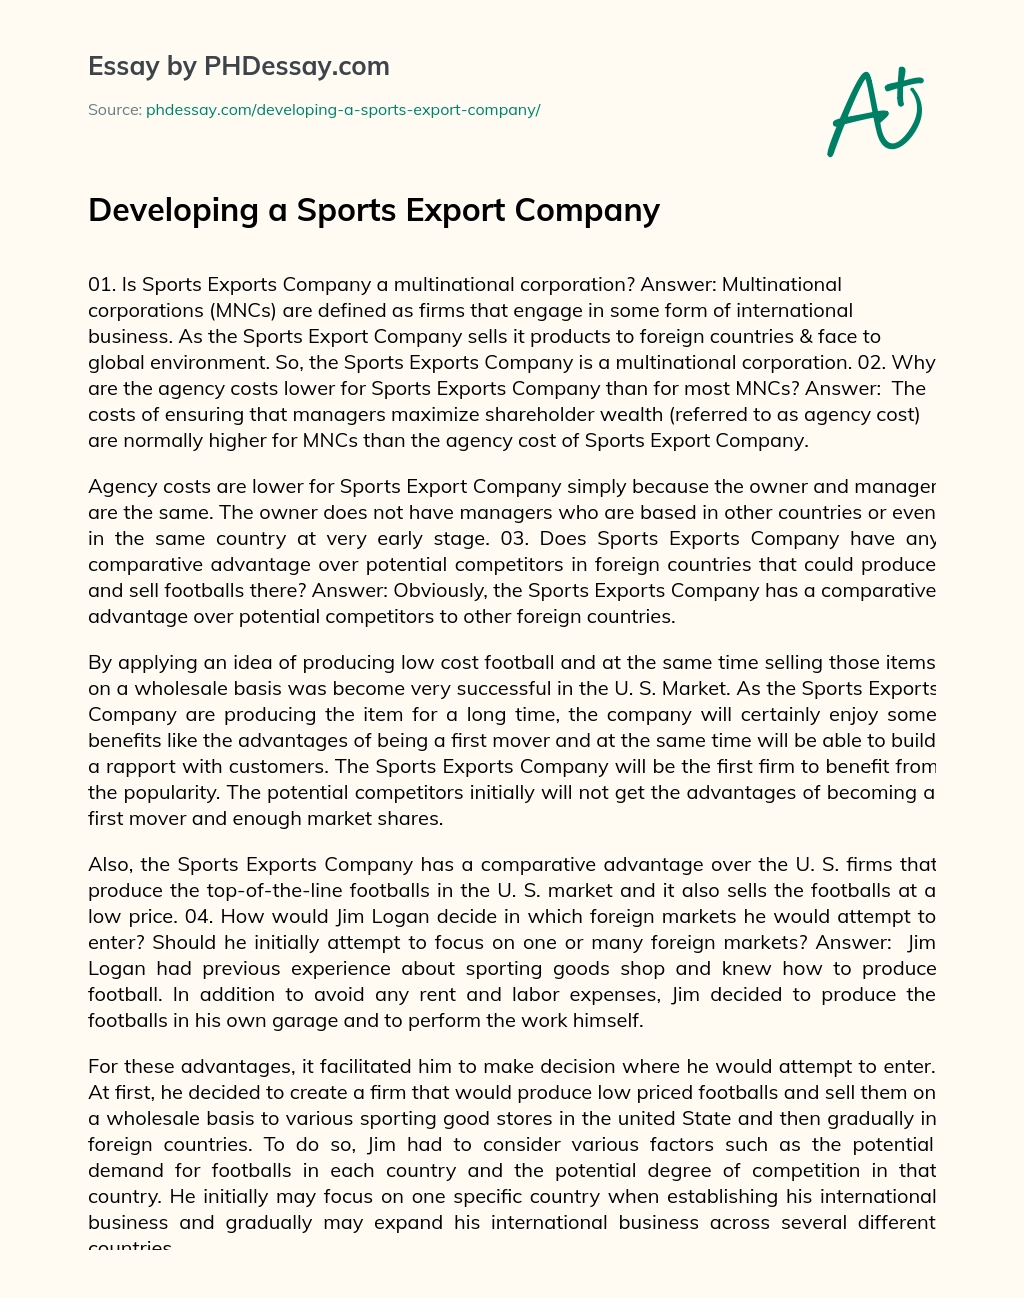 Developing a Sports Export Company essay